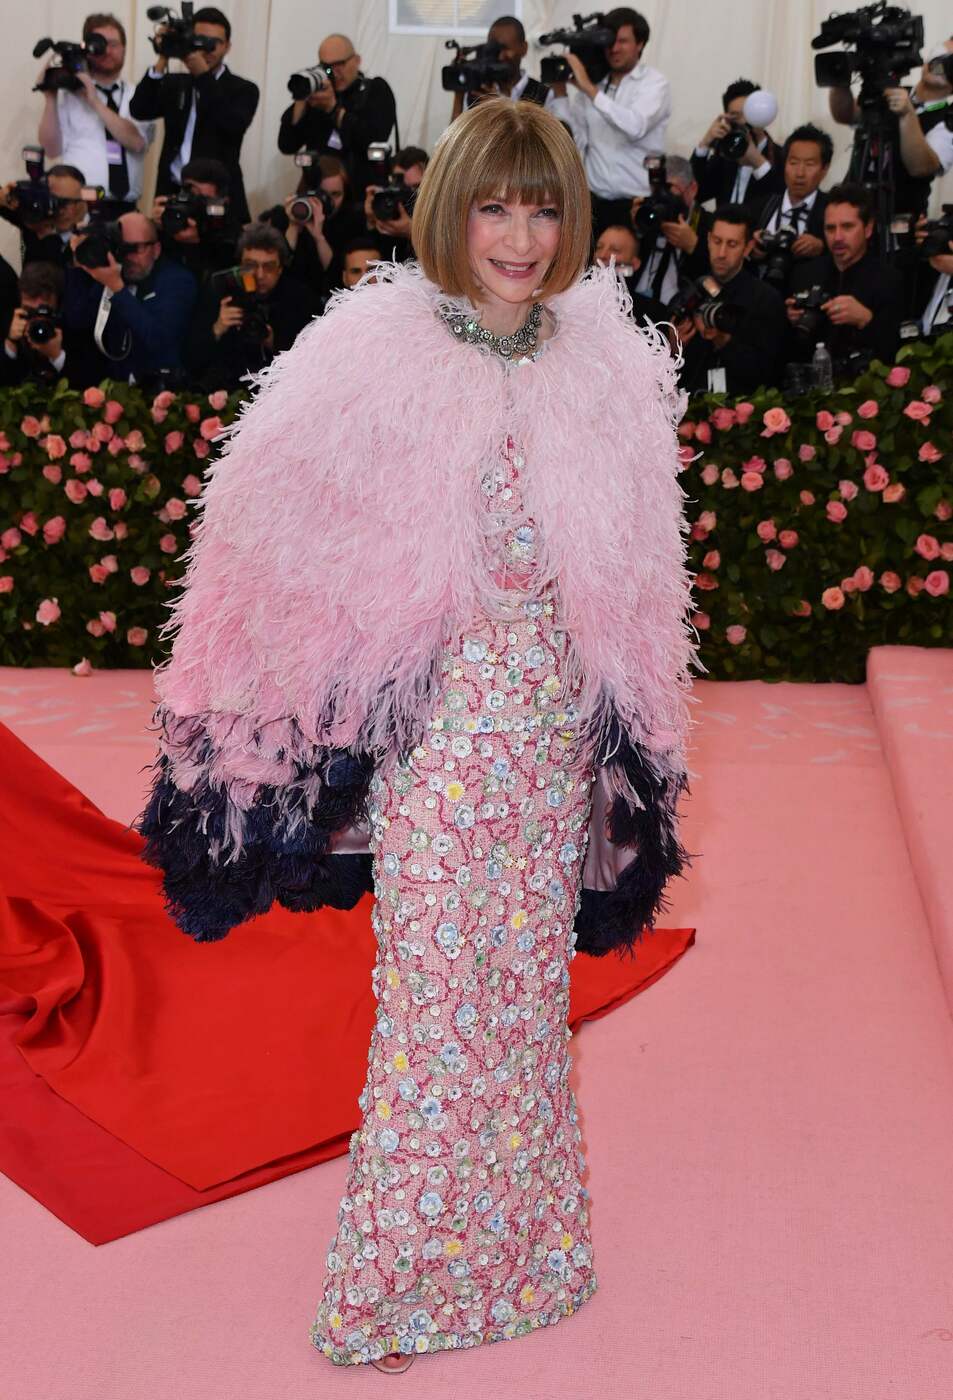 Vogue Editor-in-Chief Anna Wintour arrives for the 2019 Met Gala